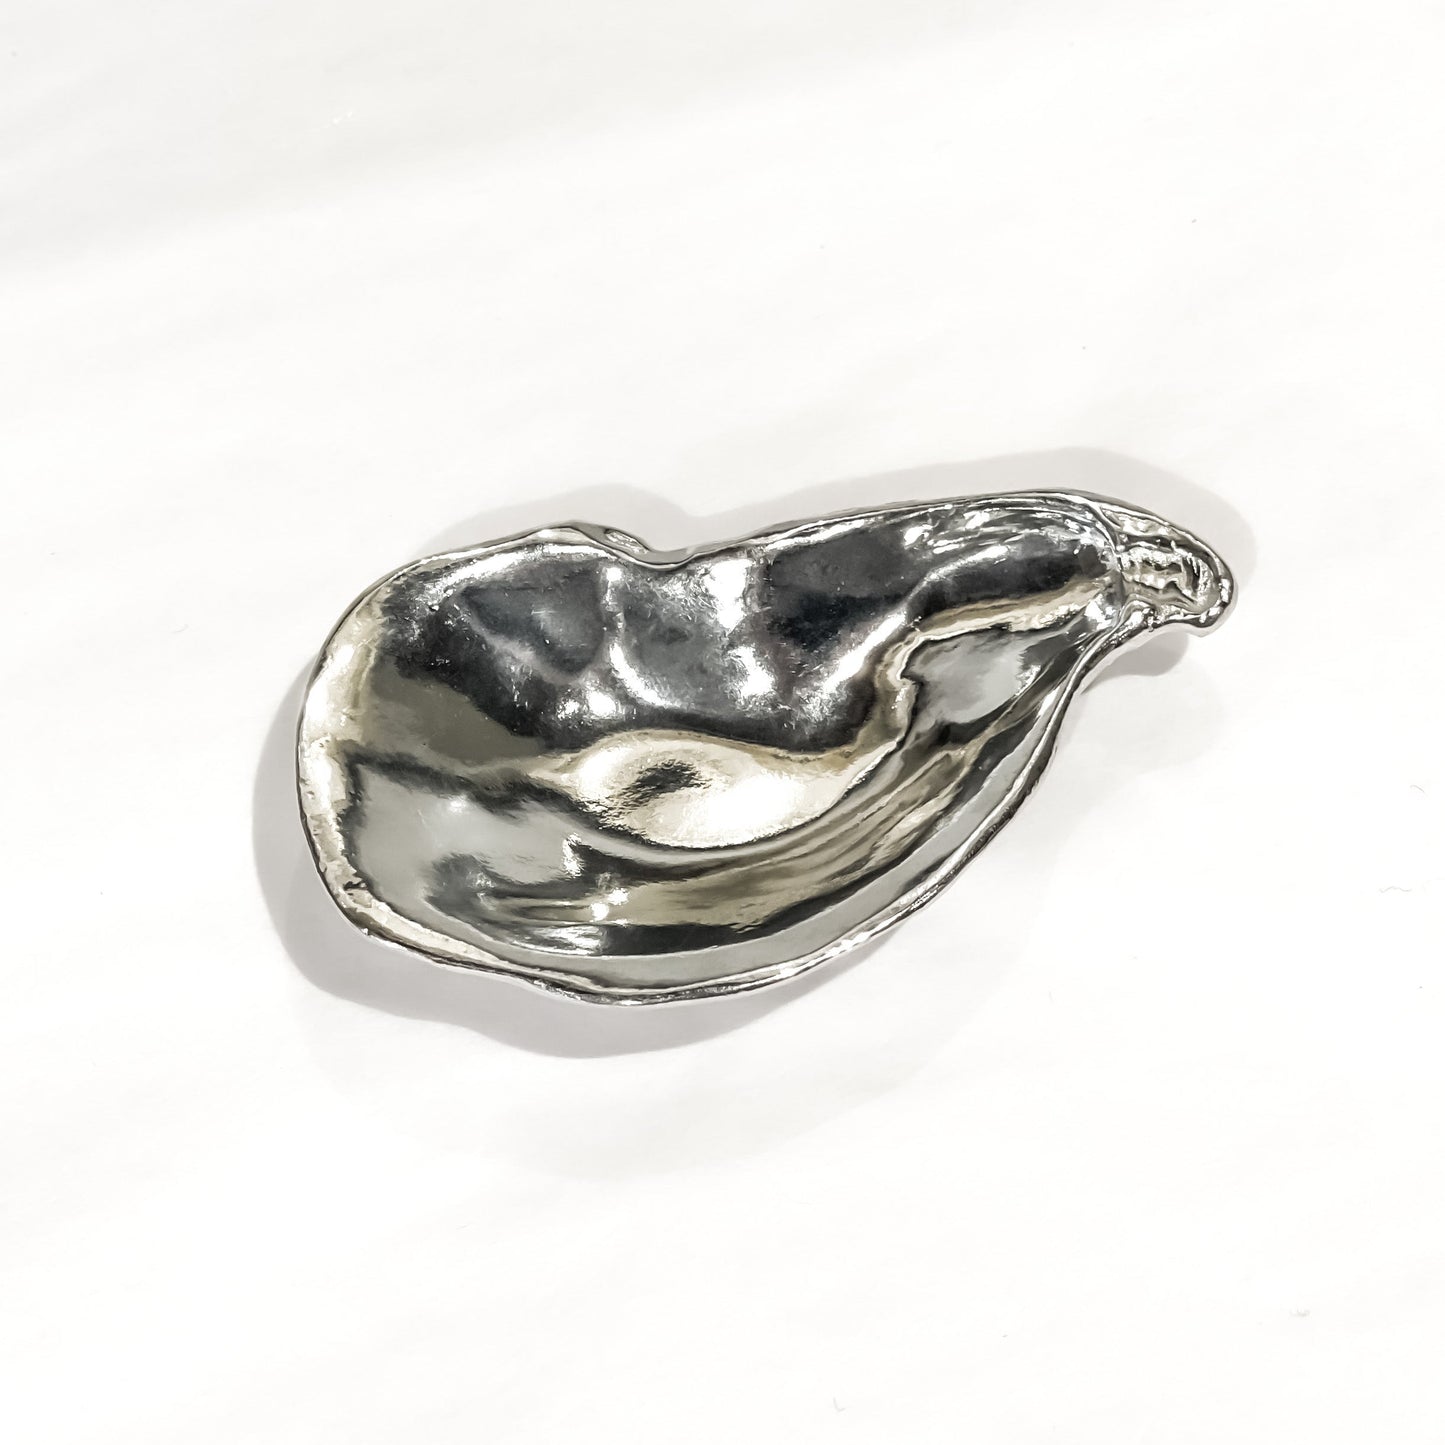 Pewter Oyster Salt Cellar With Spoon